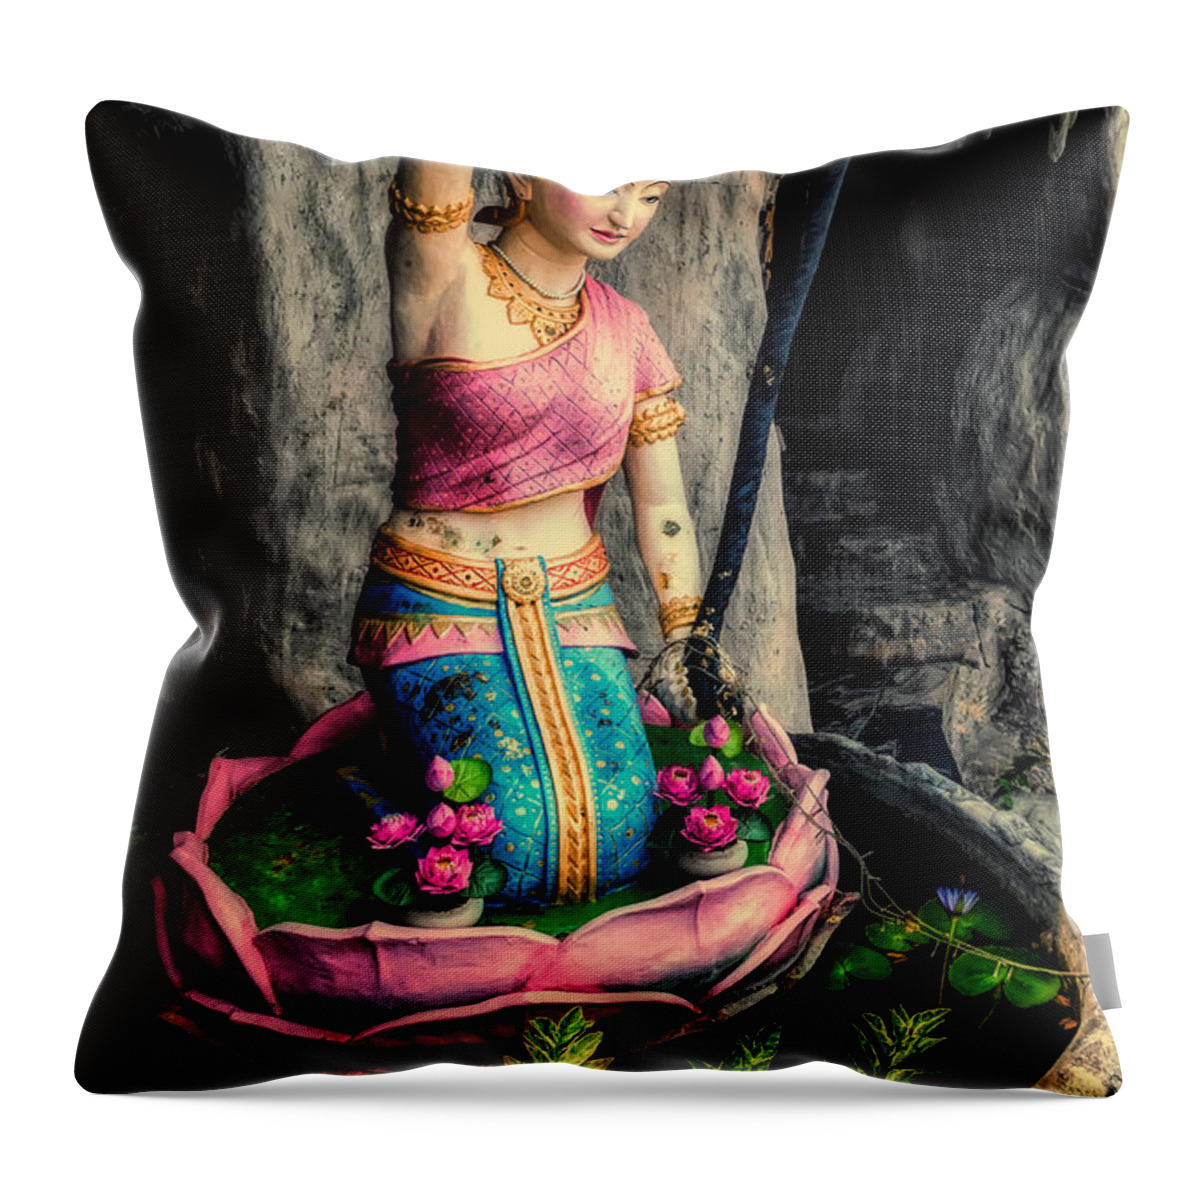 Temple Statue Throw Pillow featuring the photograph Temple Lady Statue by Adrian Evans